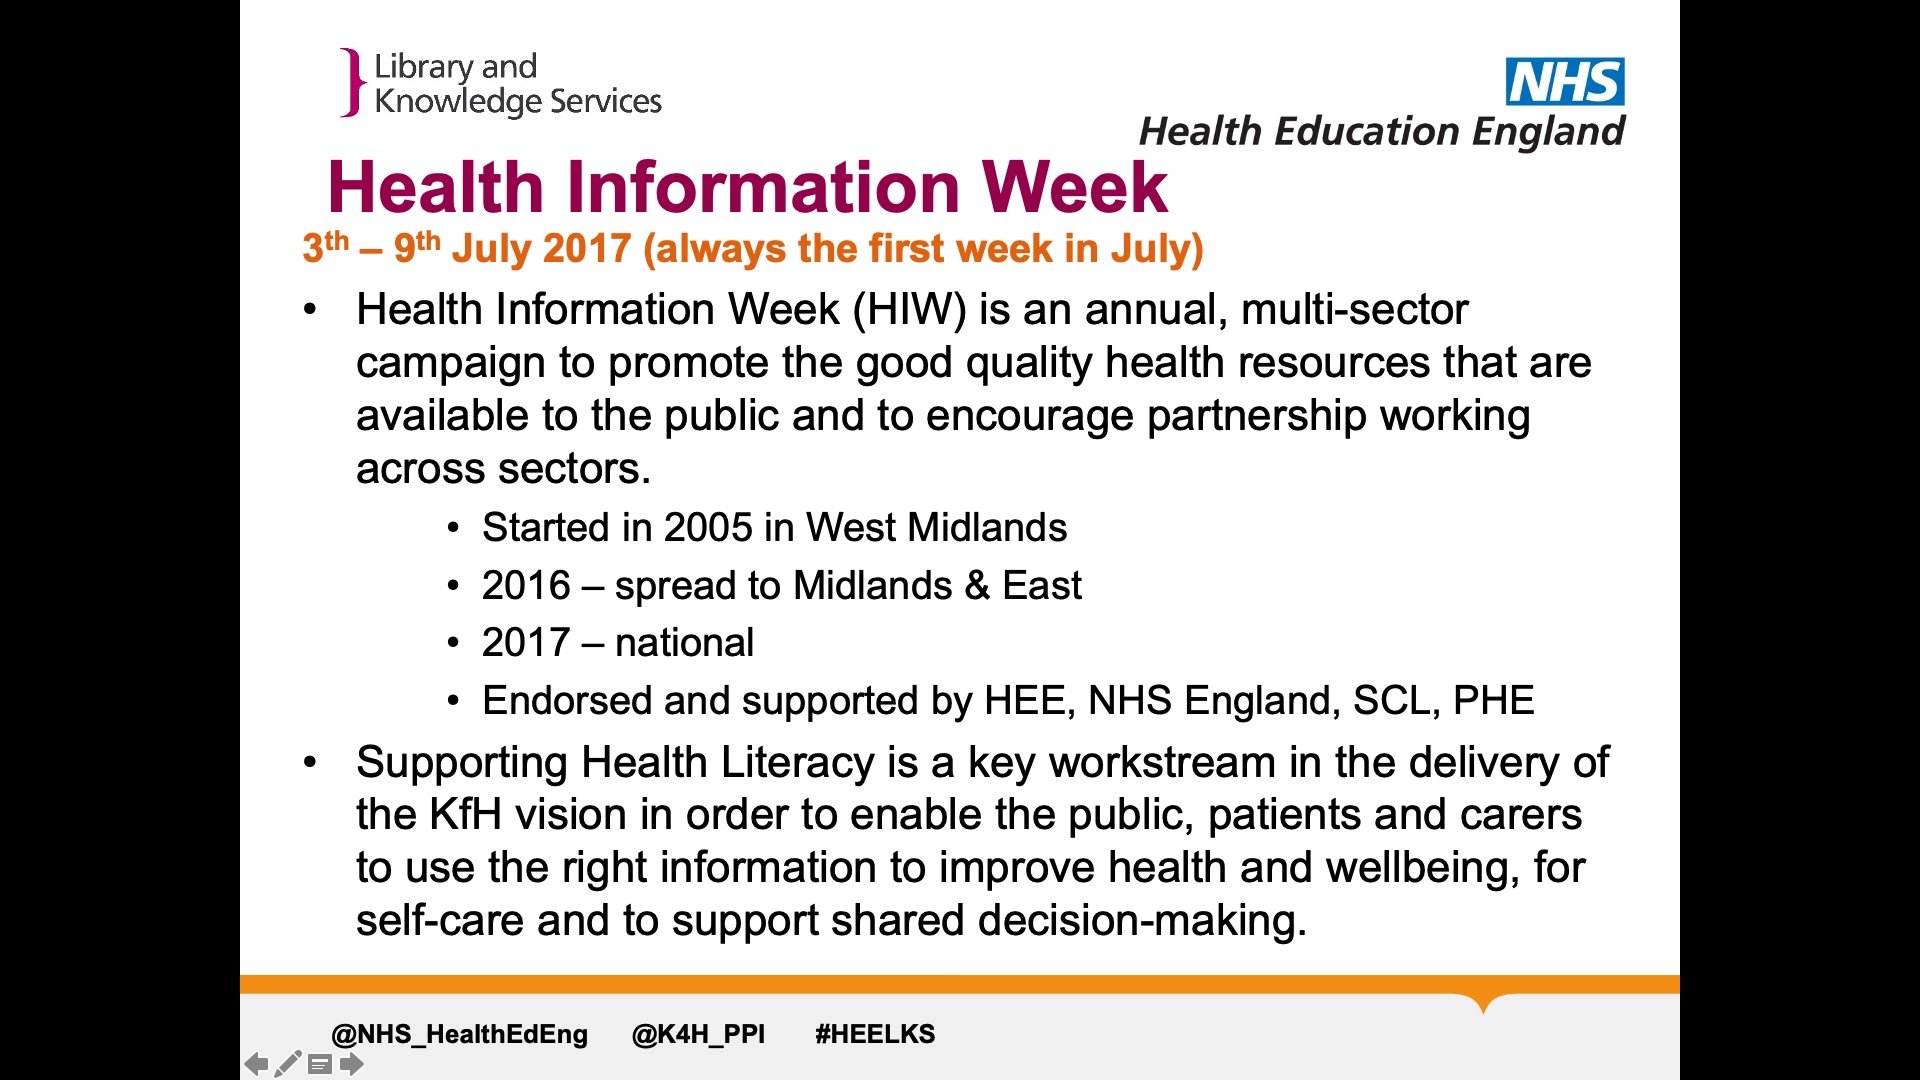 Title: Health information week. Text on page: Health Information Week (HIW) is an annual, multi-sector campaign to promote the good quality health resources that are available to the public and to encourage partnership working across sectors.   Started in 2005 in West Midlands 2016 – spread to Midlands & East 2017 – national Endorsed and supported by HEE, NHS England, SCL, PHE Supporting Health Literacy is a key workstream in the delivery of the KfH vision in order to enable the public, patients and carers to use the right information to improve health and wellbeing, for self-care and to support shared decision-making.